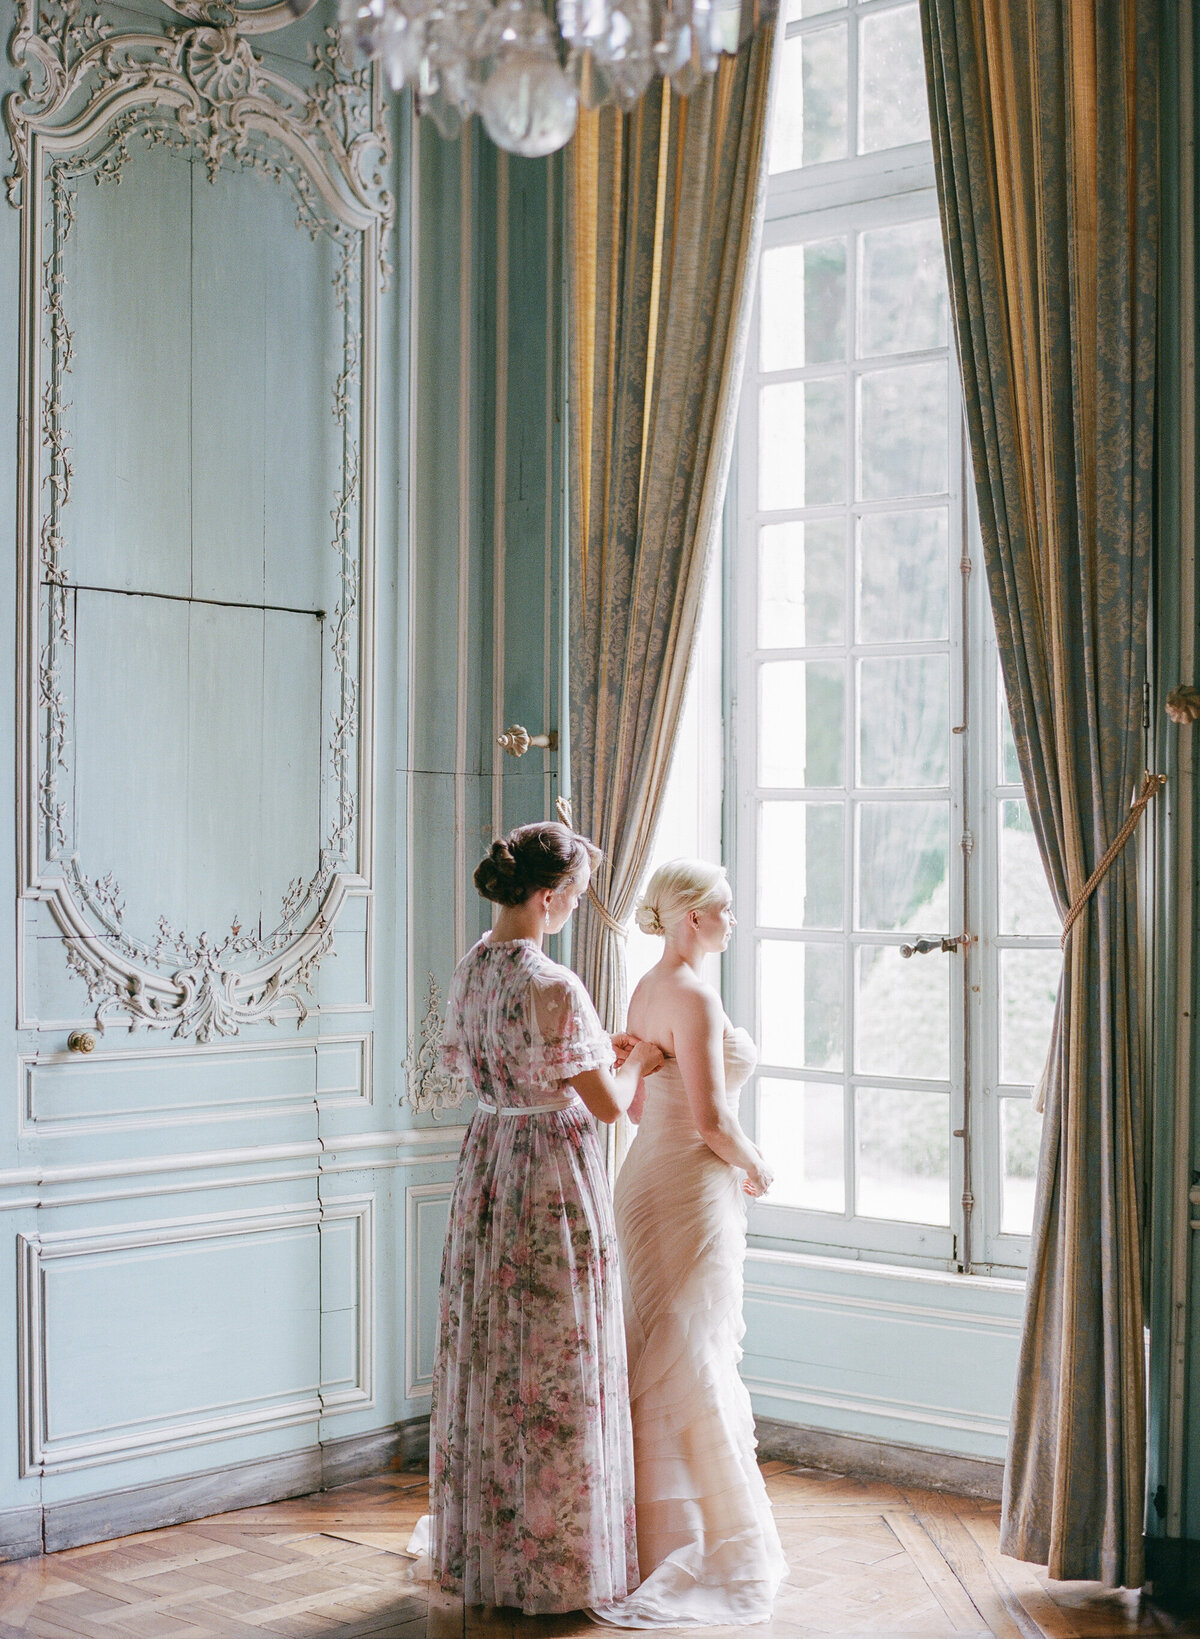 Jennifer Fox Weddings English speaking wedding planning & design agency in France crafting refined and bespoke weddings and celebrations Provence, Paris and destination Laurel-Chris-Chateau-de-Champlatreaux-Molly-Carr-Photography-35